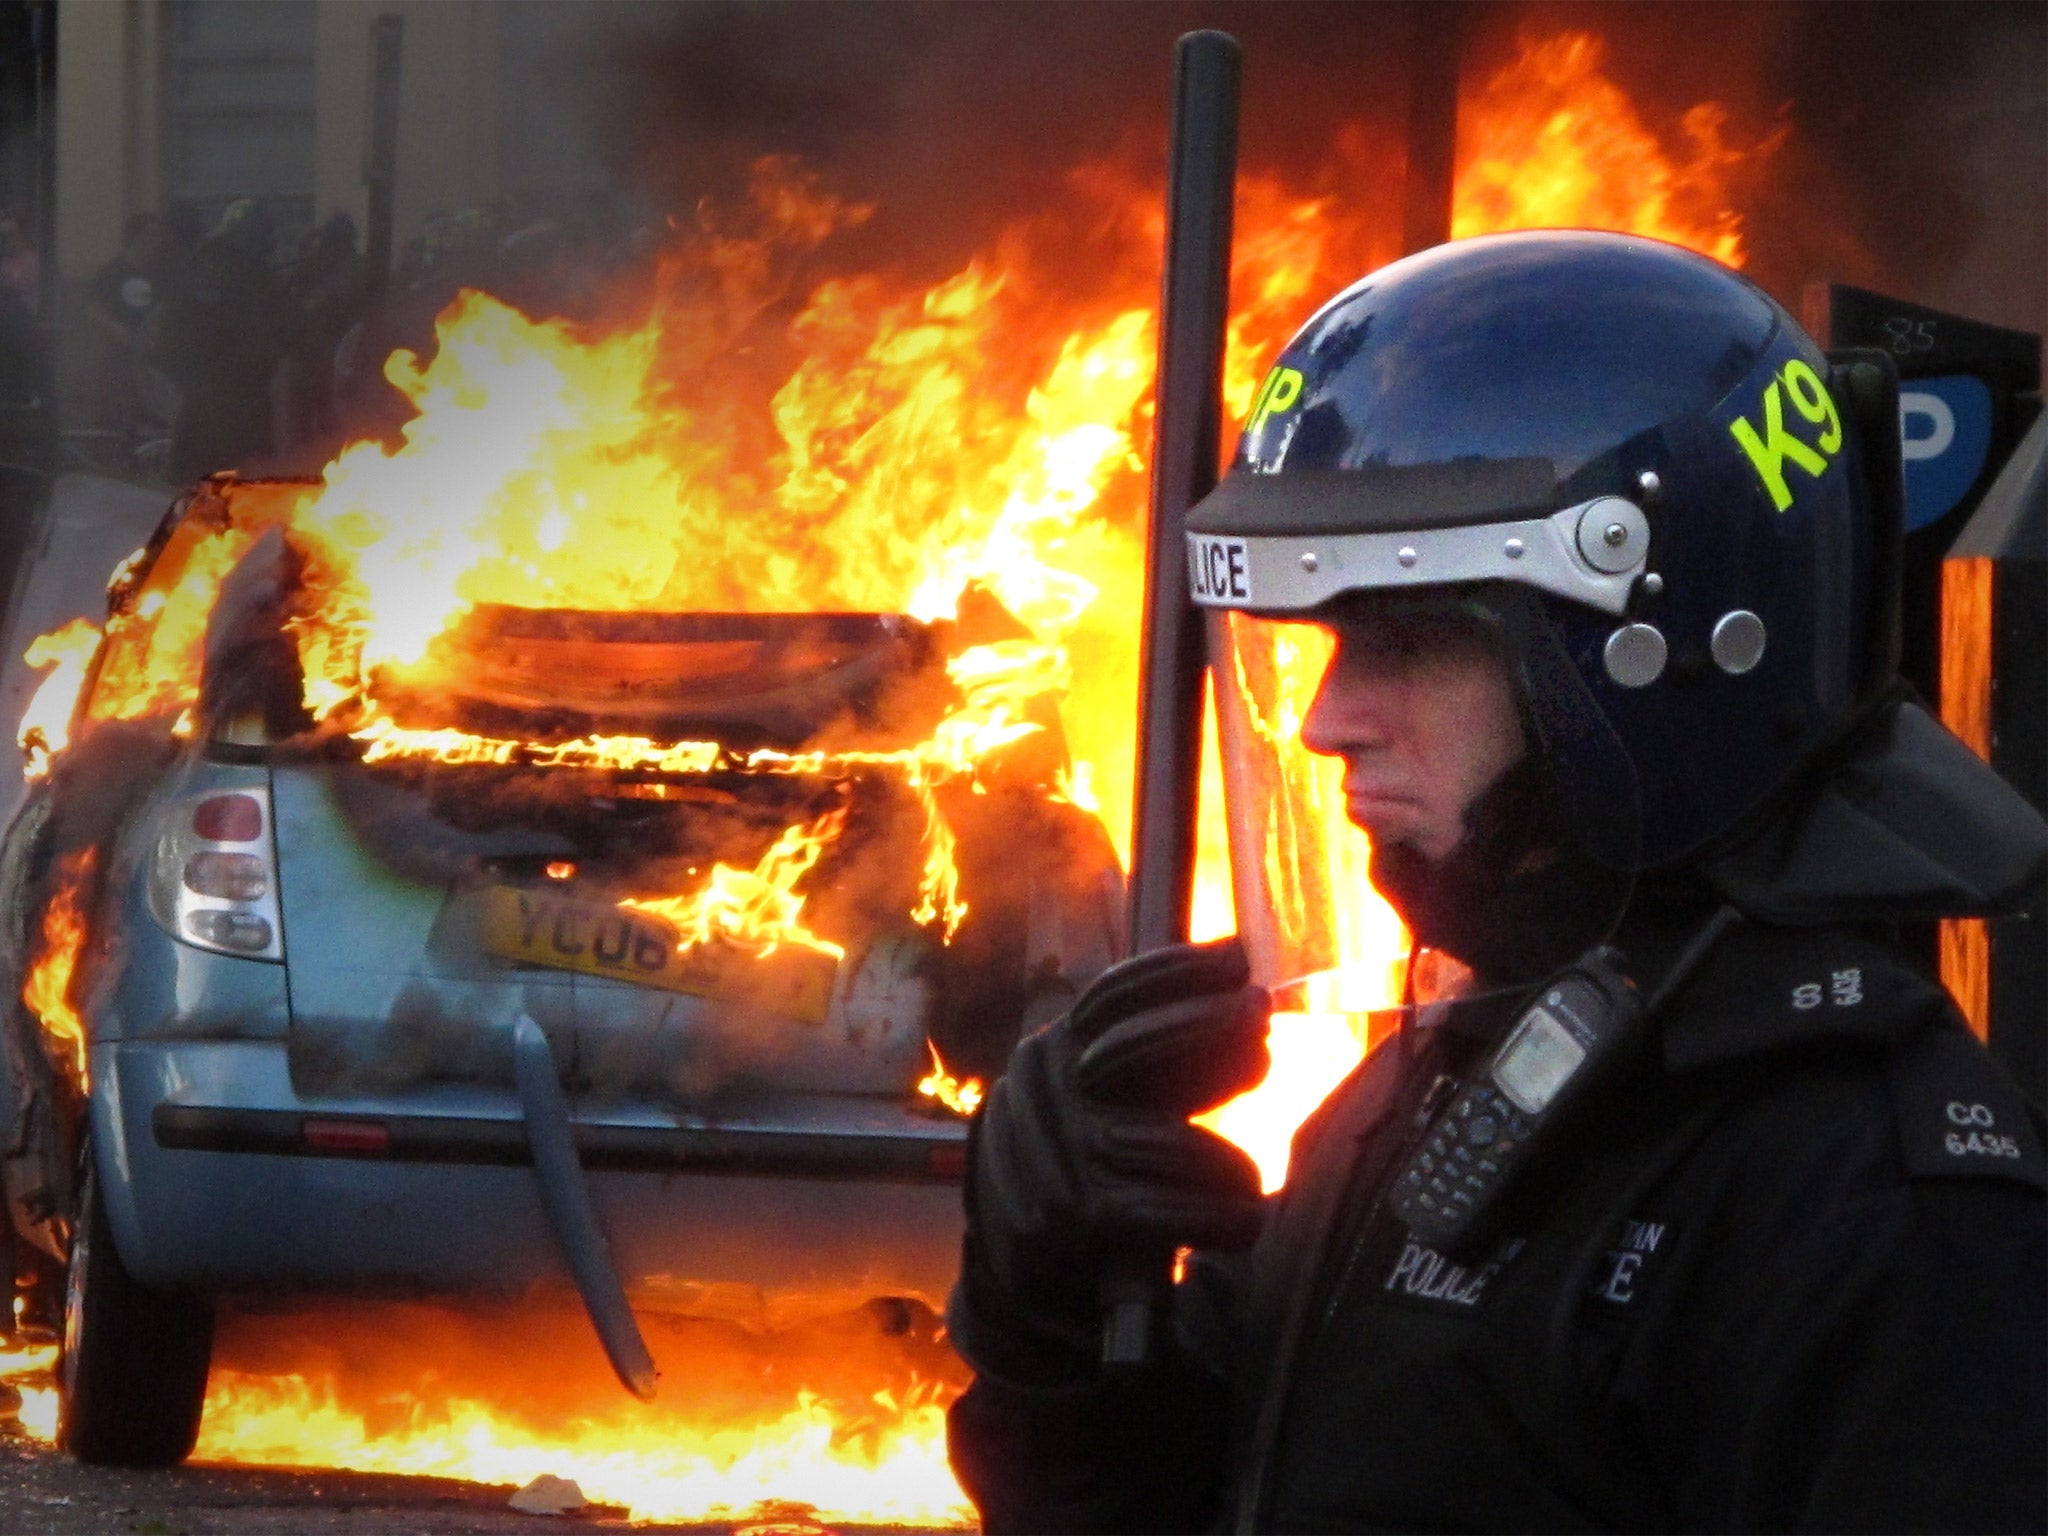 The riots in August 2011 prompted a debate on police tactics